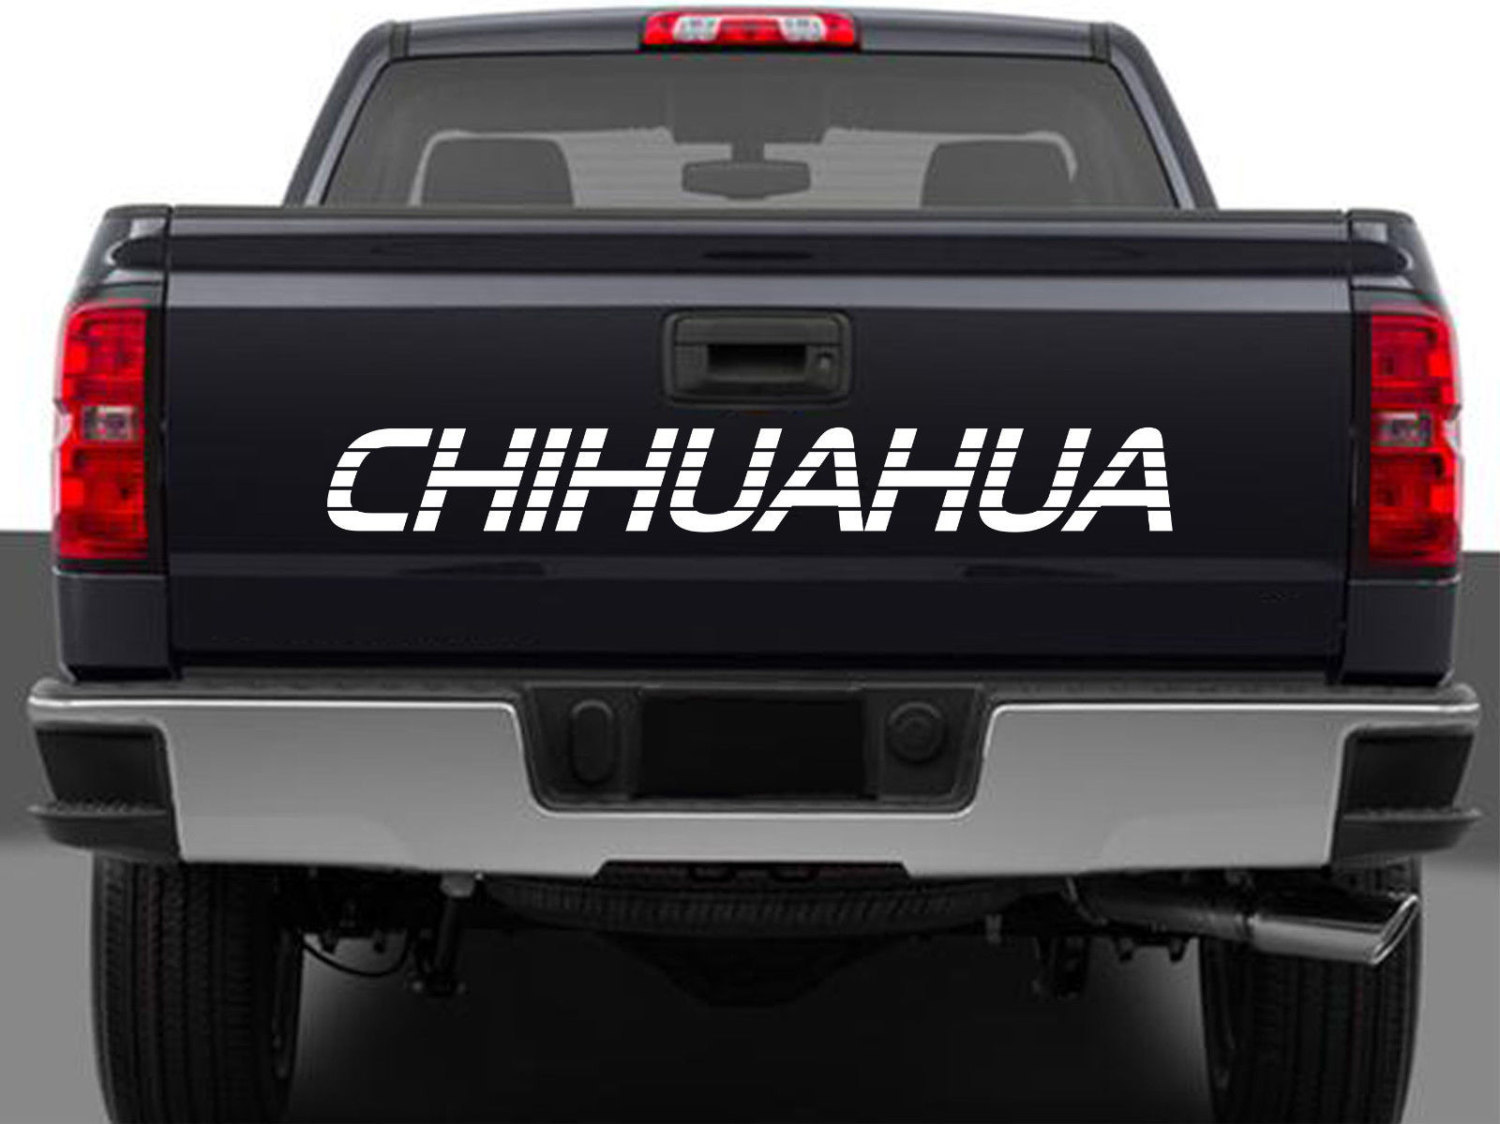 Chihuahua Mexico Truck  Decal  Sticker  Tailgate for Chevy 